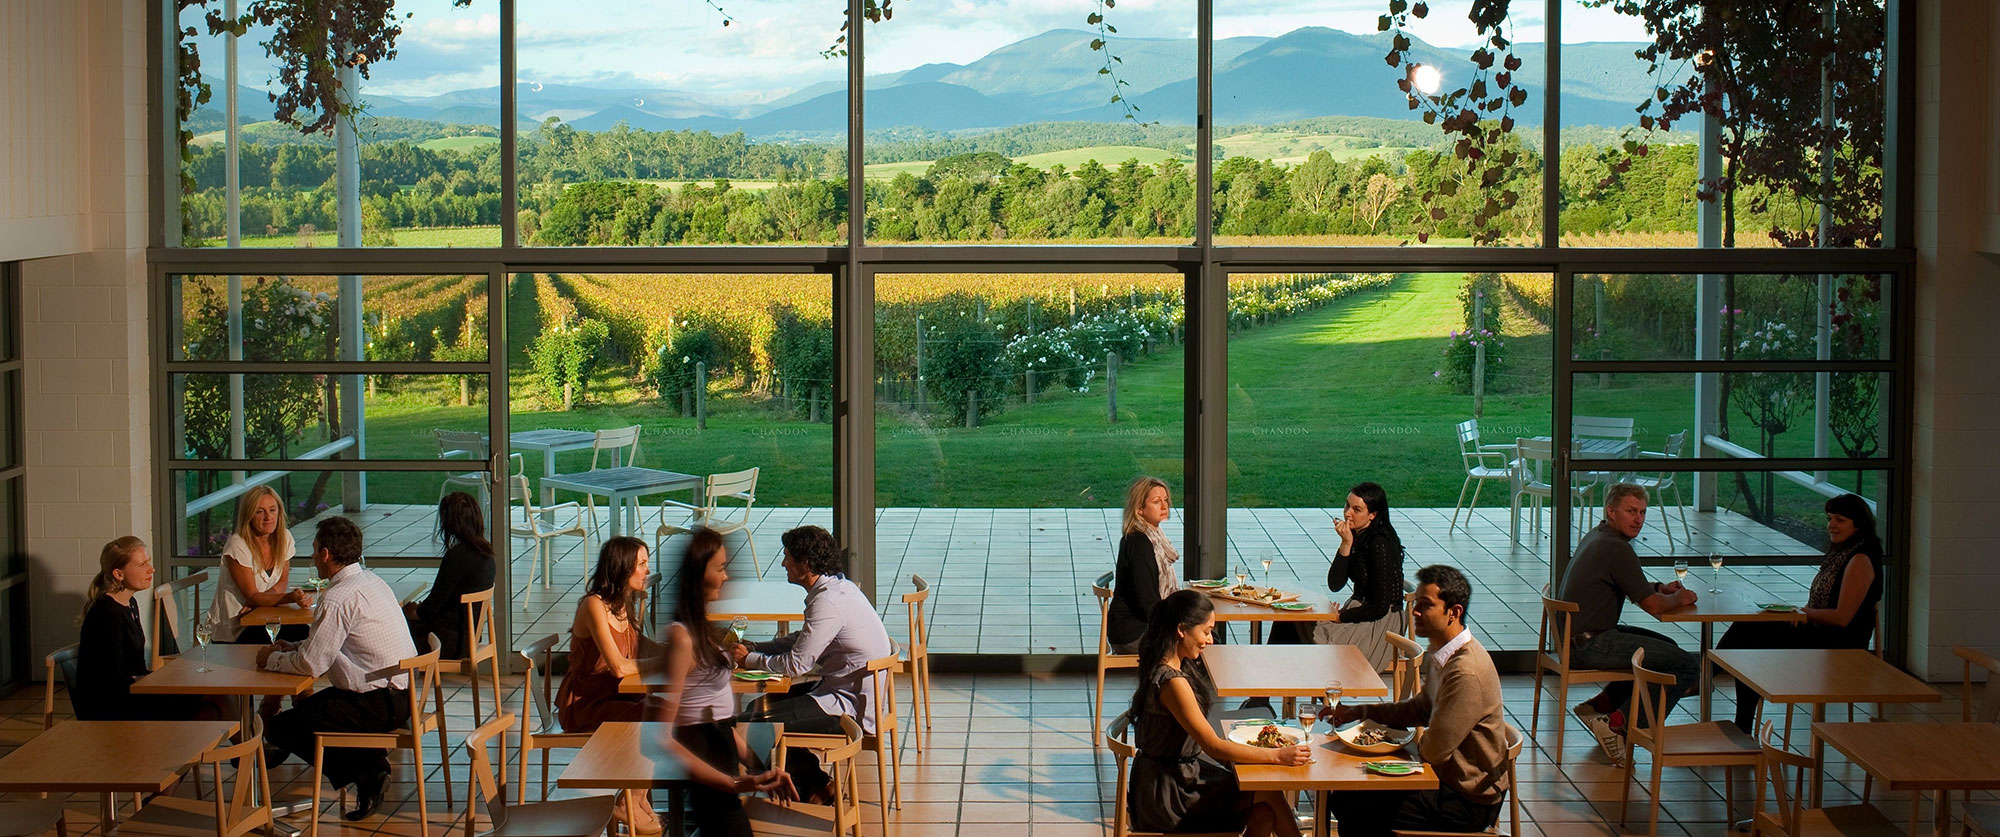 Dining at Domaine Chandon winery in the Yarra Valley, Melbourne, Victoria, Australia